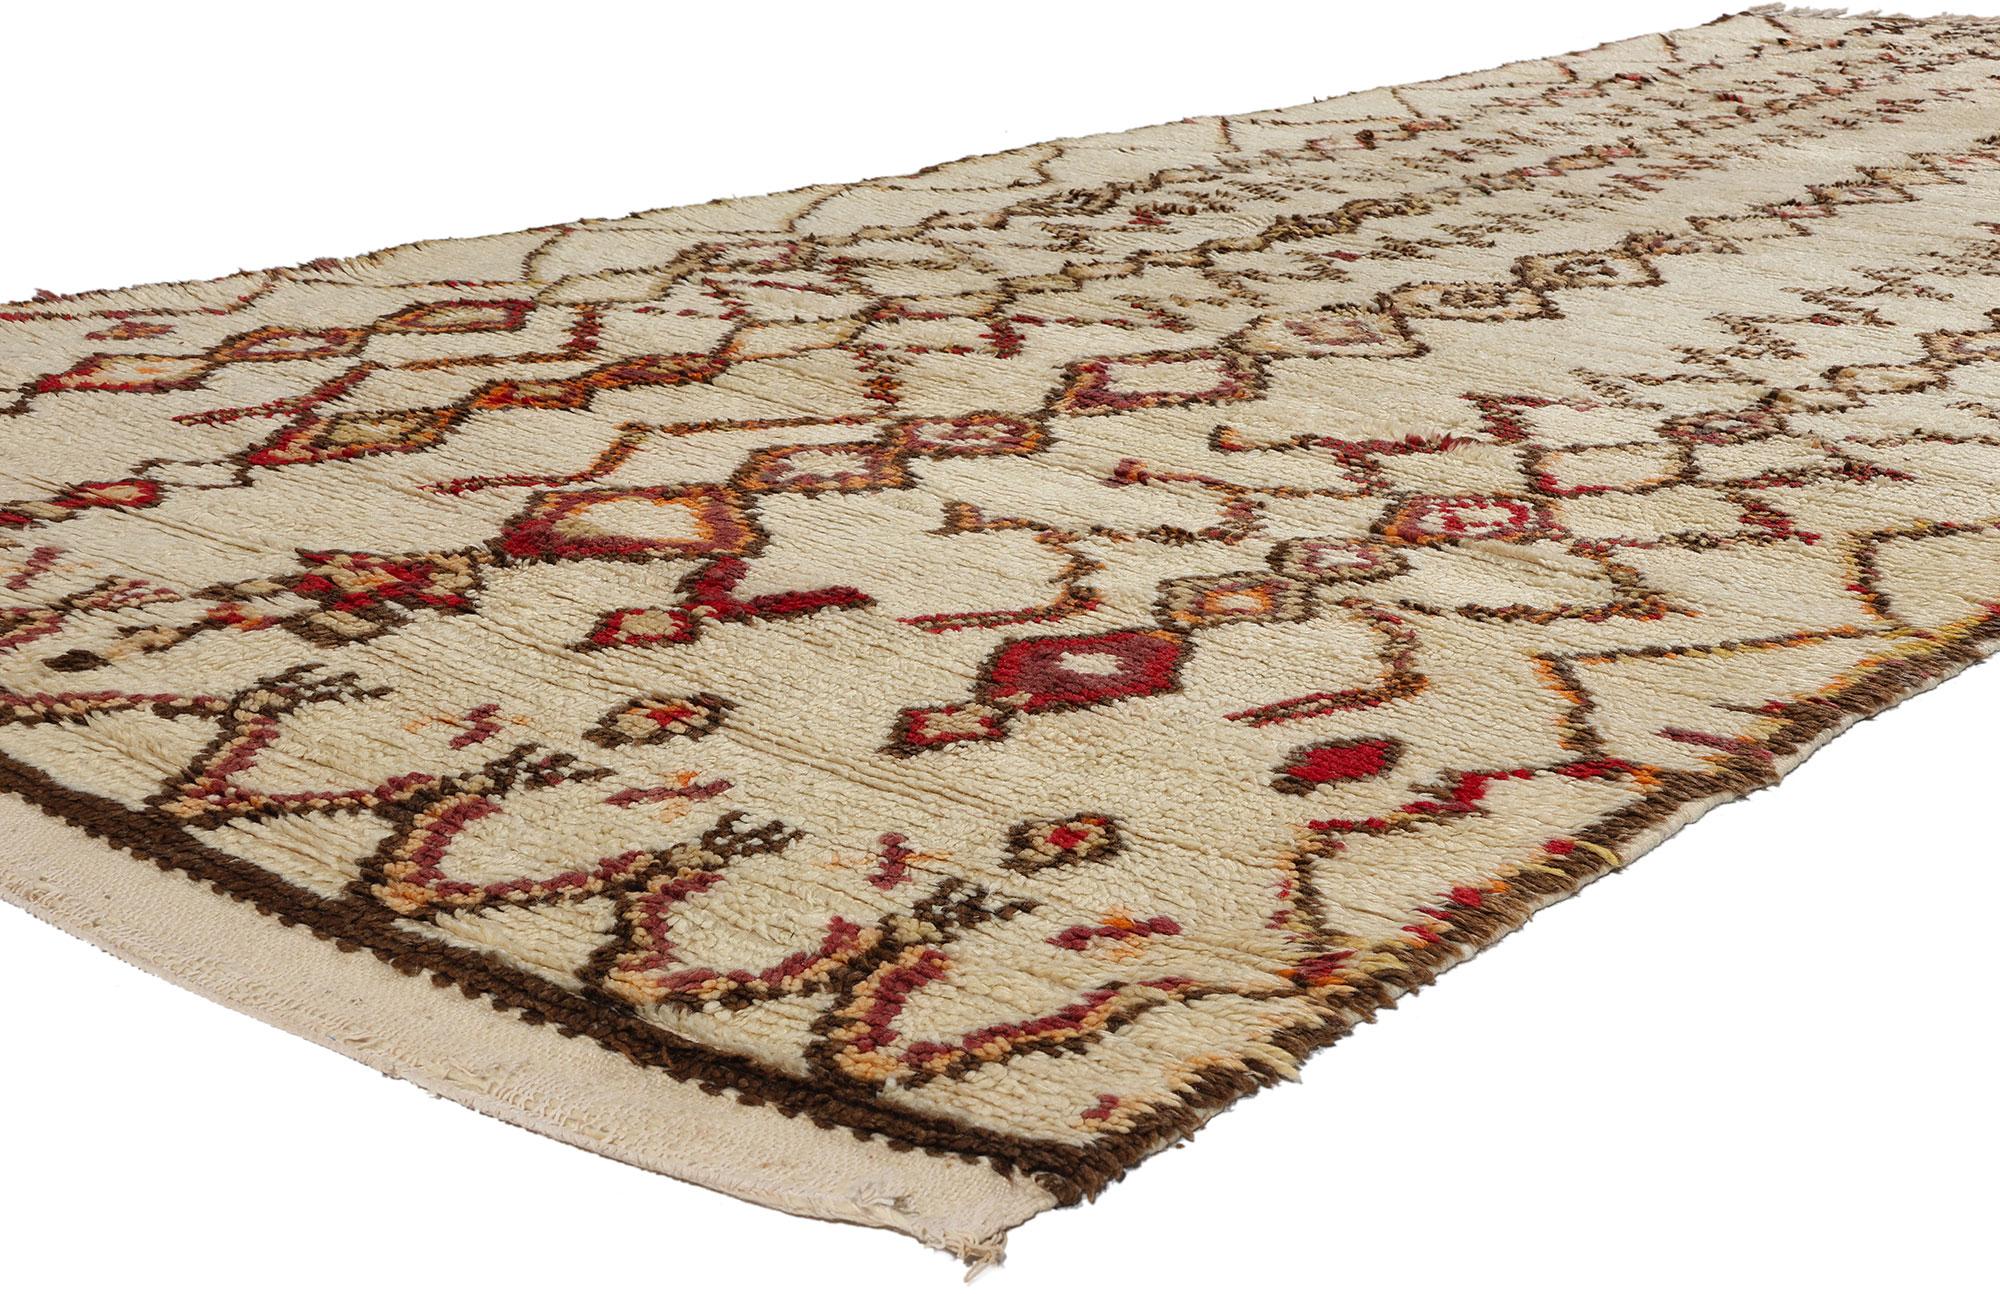 21826 Vintage Neutral Moroccan Azilal Rug, 05'02 x 11'11. Embark on a captivating journey into the lush heritage of Azilal rugs, unfolding from the lively heart of the provincial capital in central Morocco, cradled by the majestic High Atlas